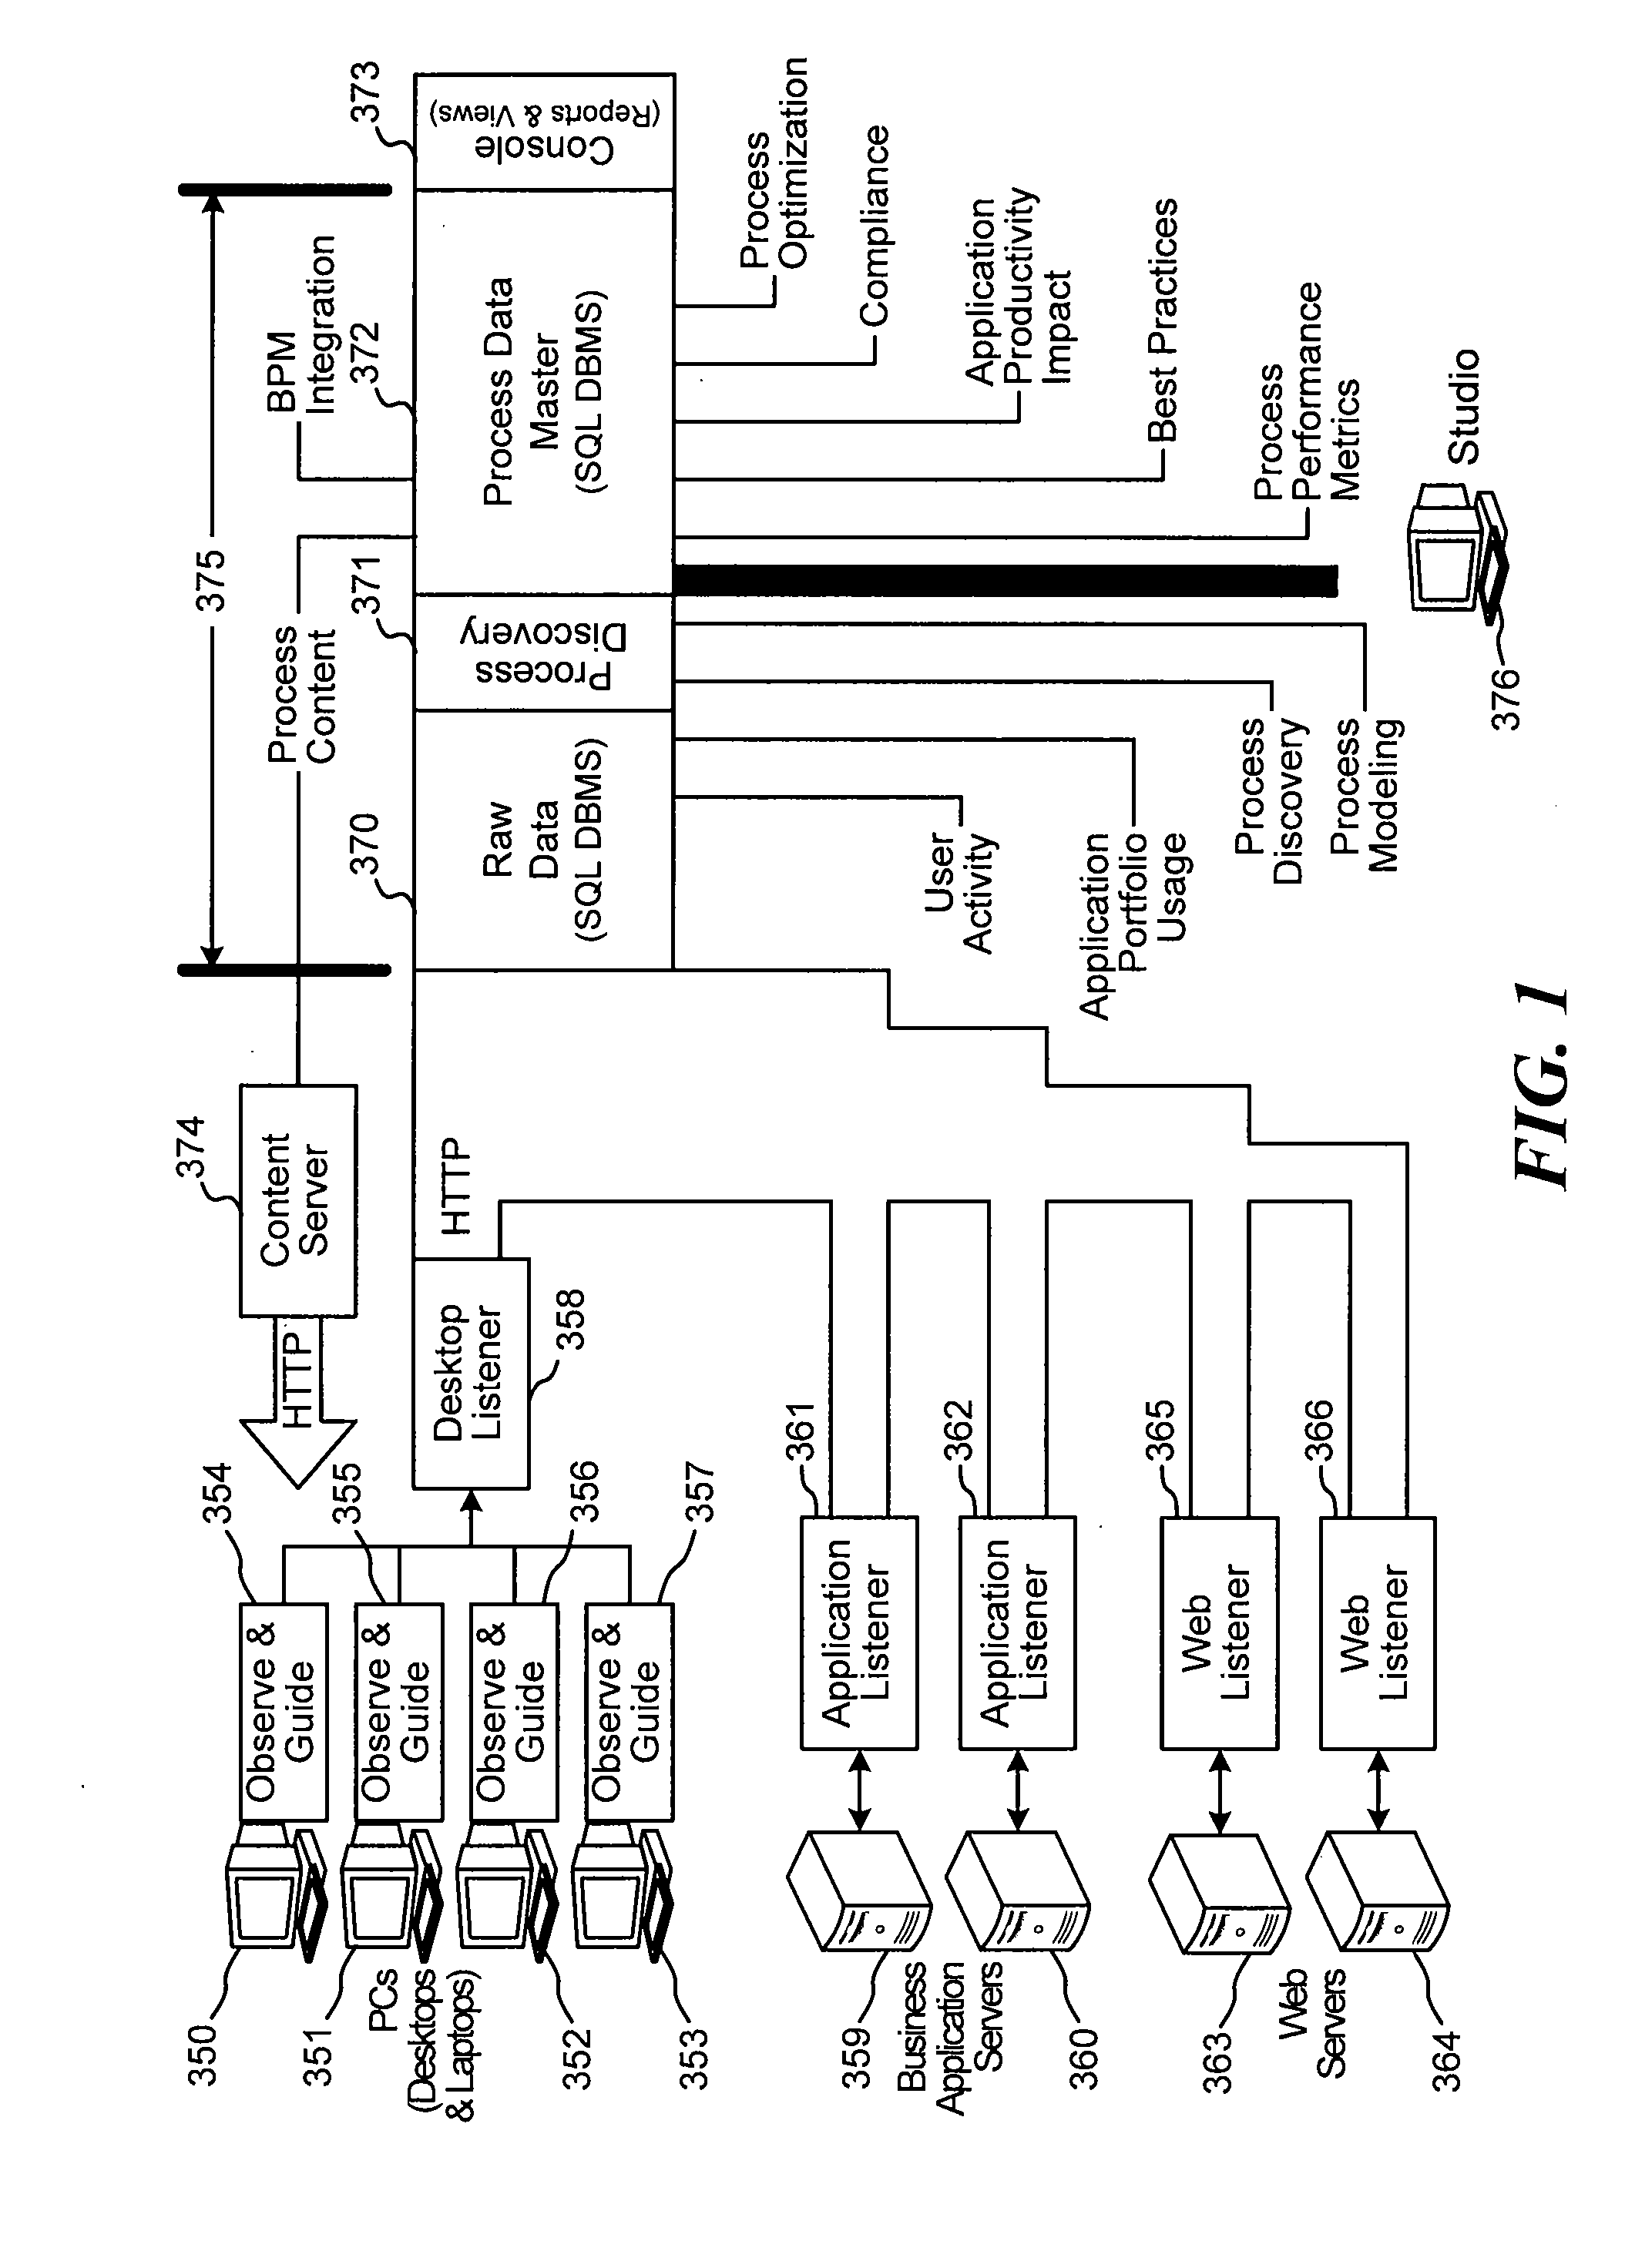 System and method for capture of user actions and use of capture data in business processes